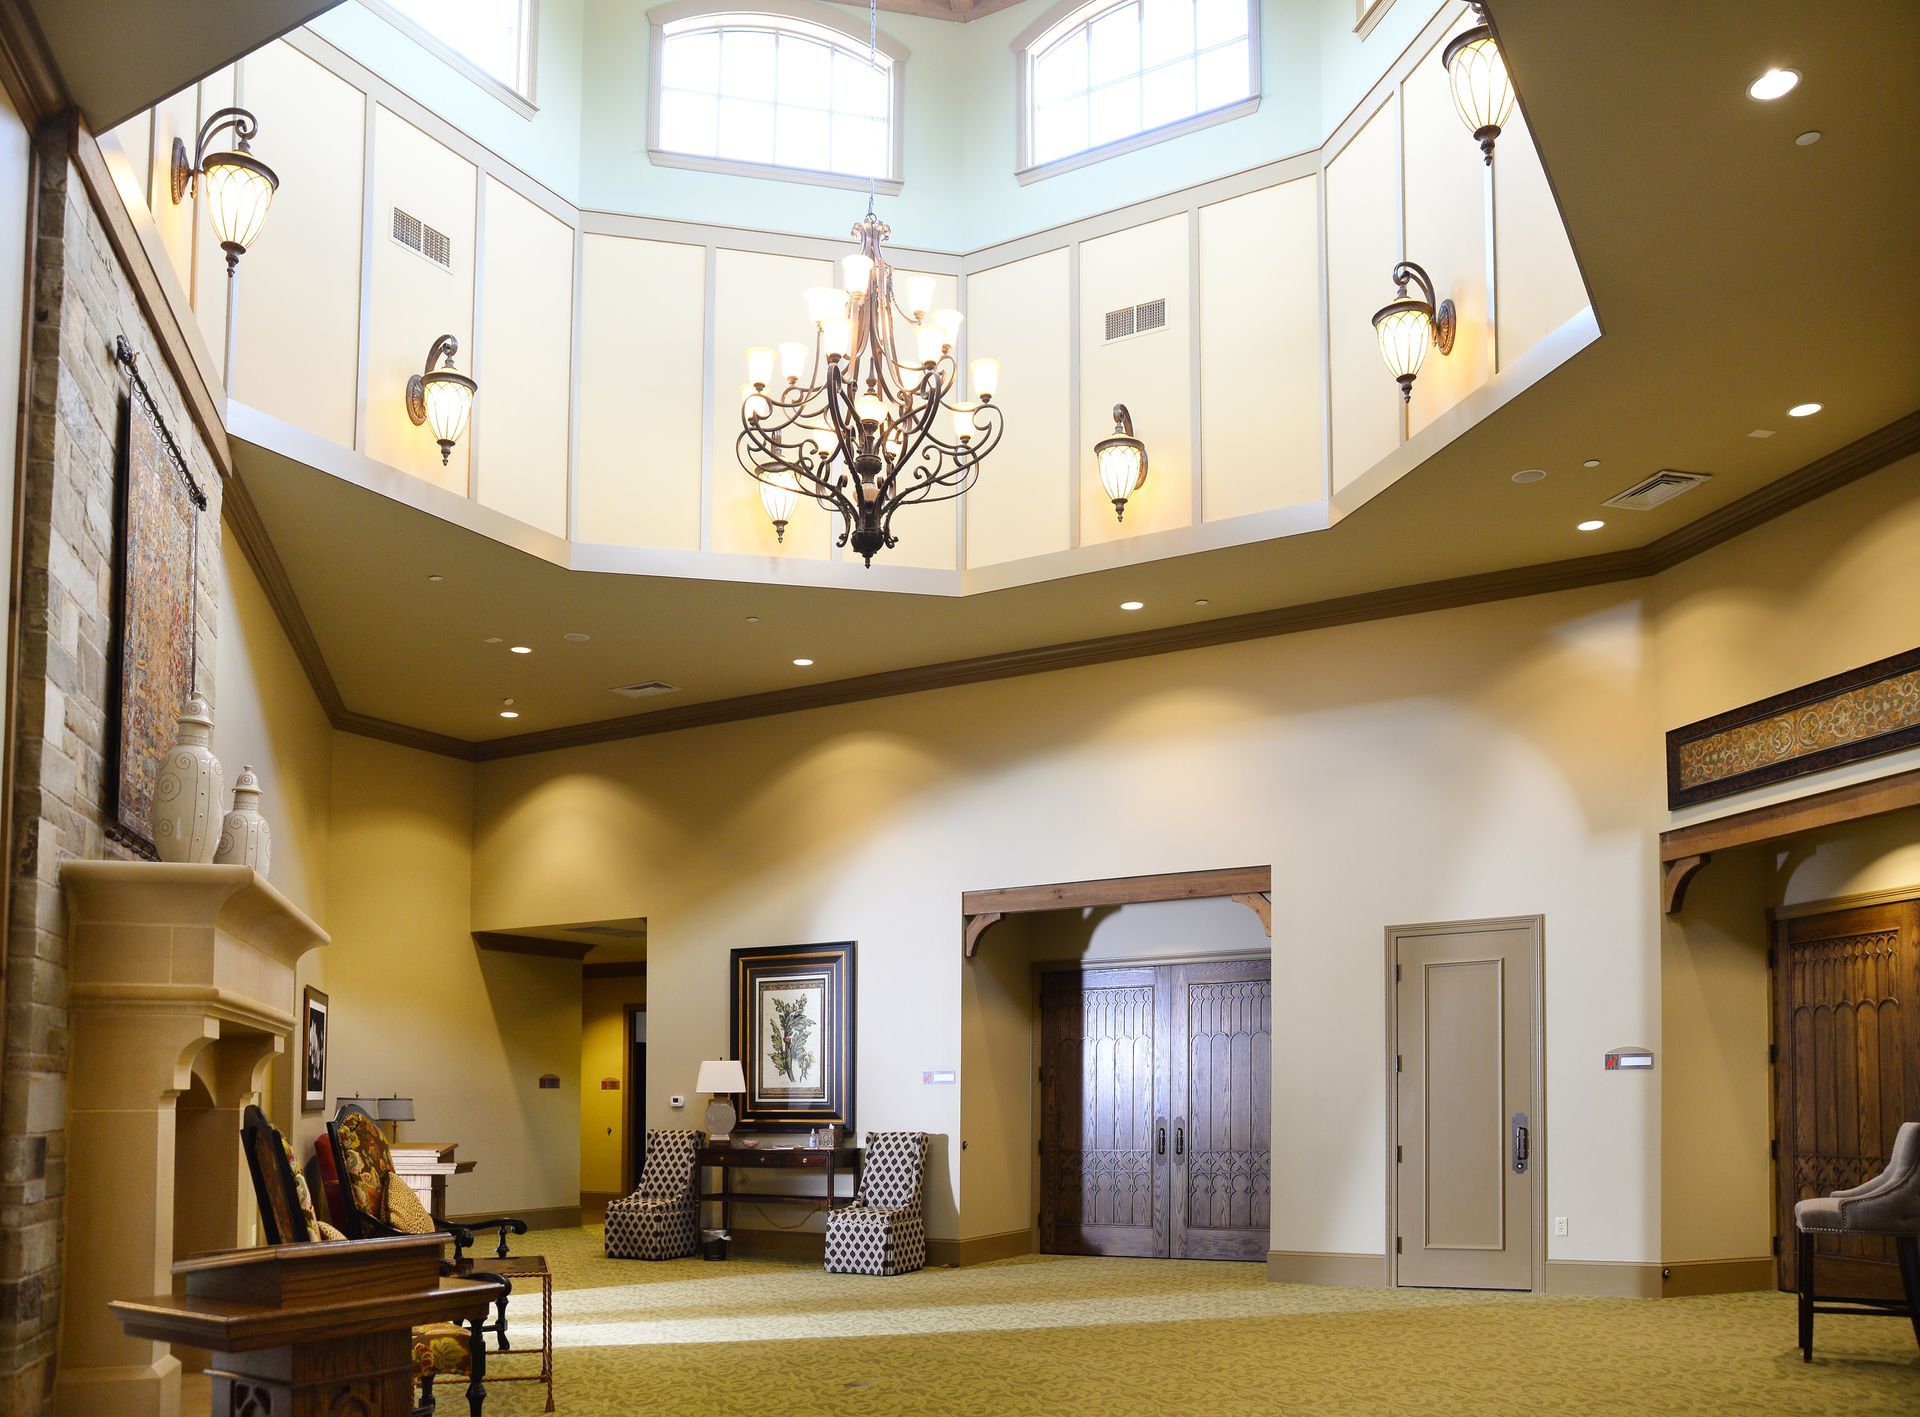 Kempf Family Funeral and Cremation Services Interior